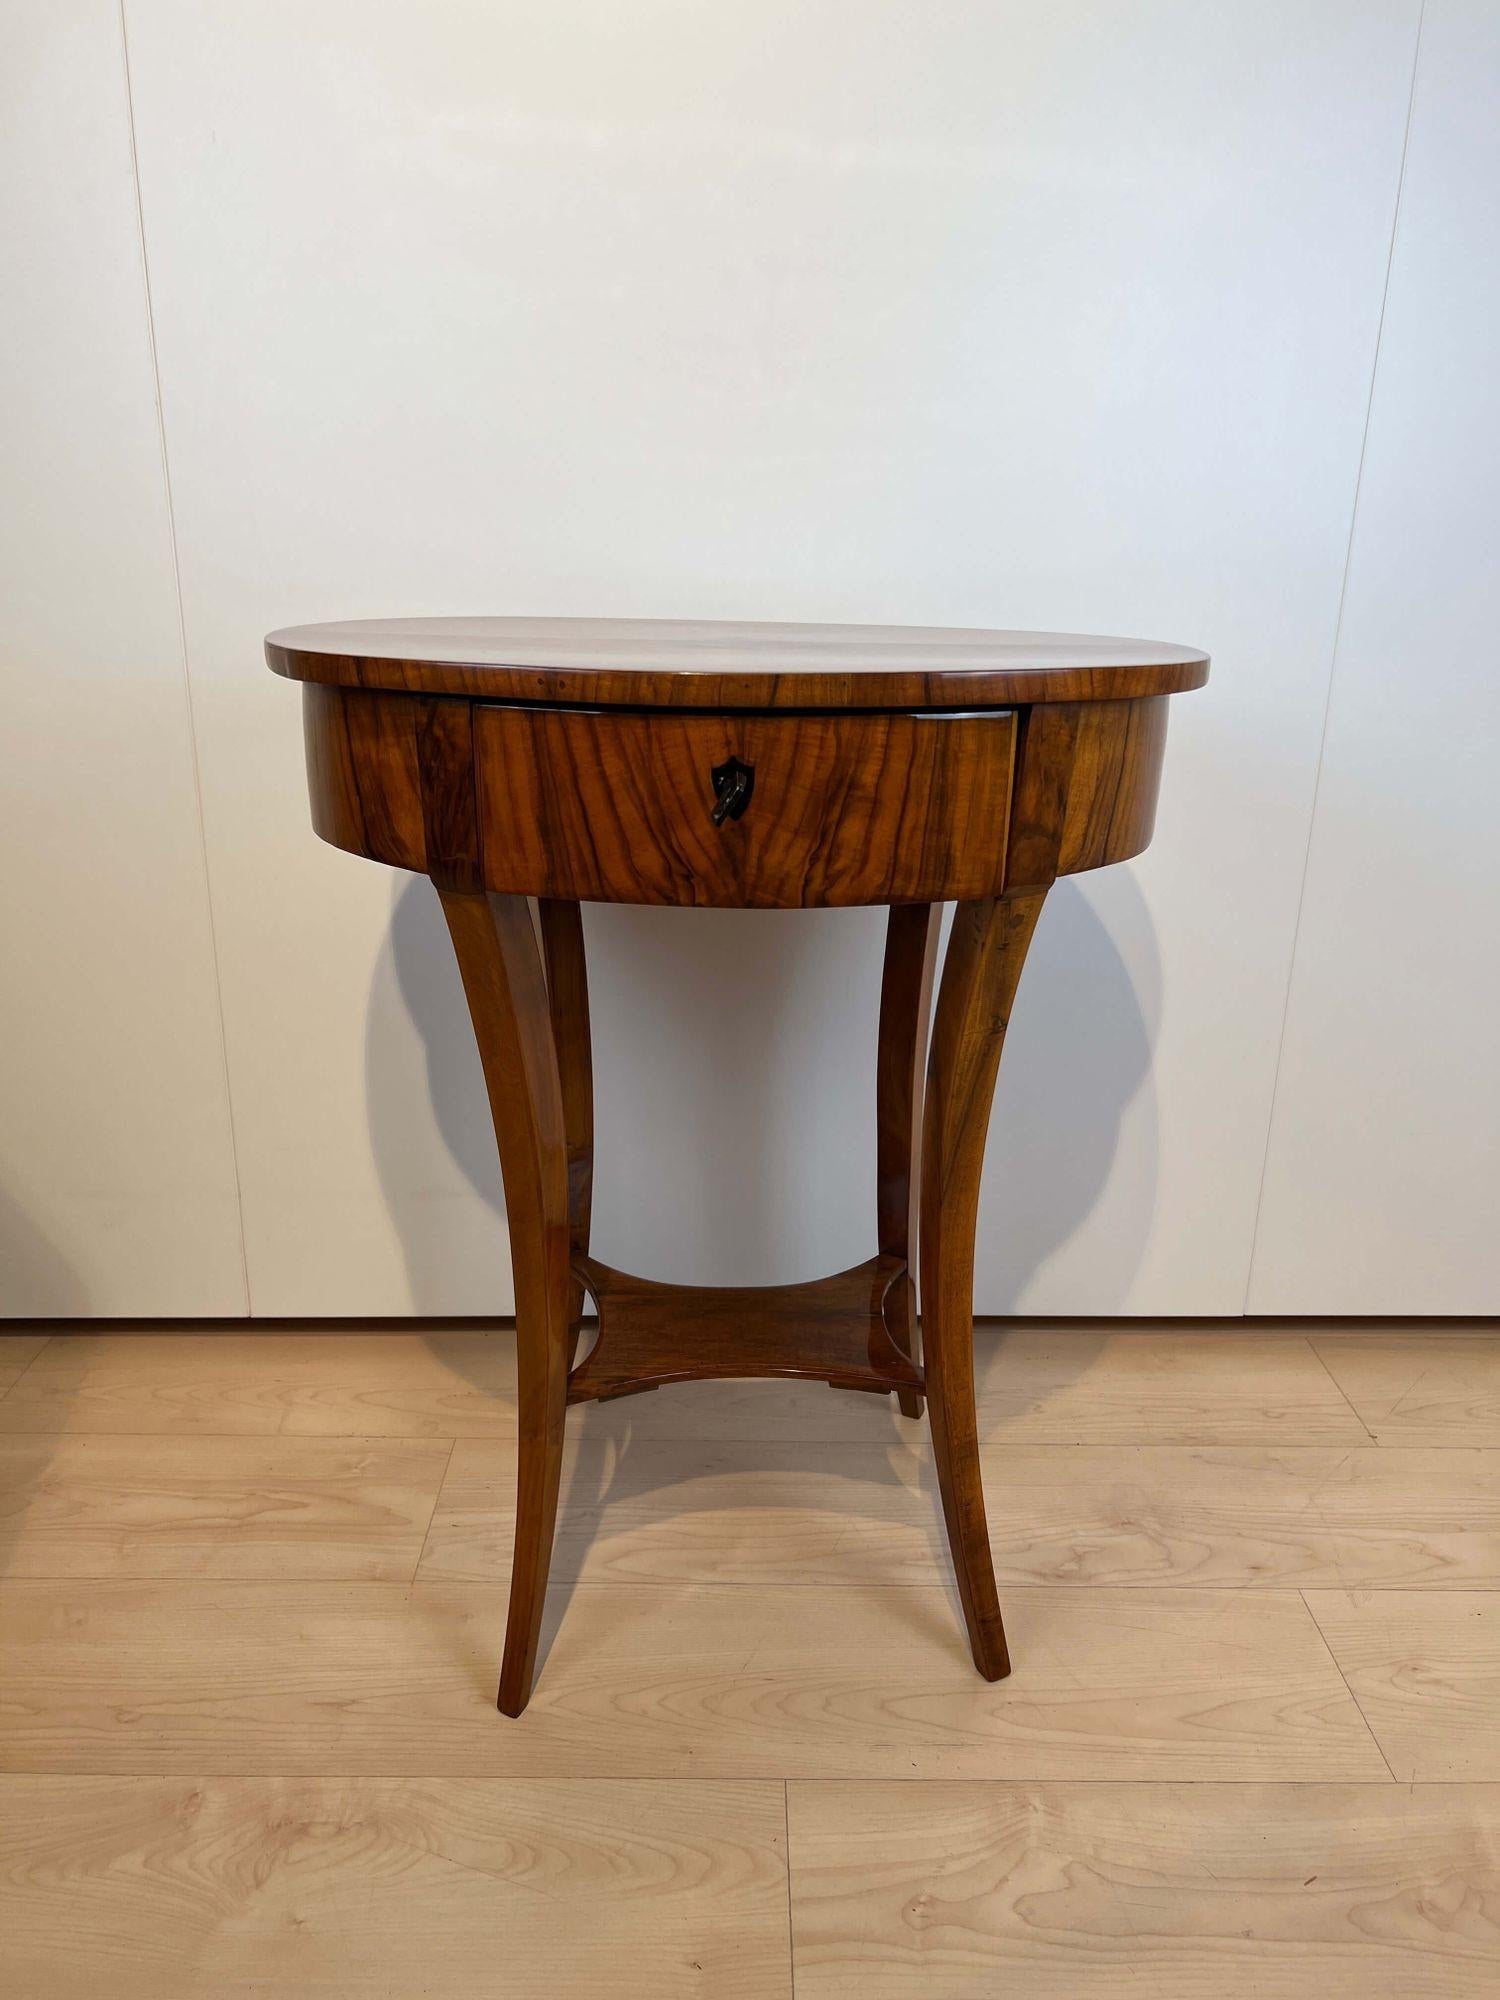 Oval Biedermeier side table or Sewing table with drawer, walnut veneer, South Germany circa 1820
 
Walnut veneered on the top and apron and solid on the four legs.
Front centre with lockable drawers. Restored and hand polished with shellac 
